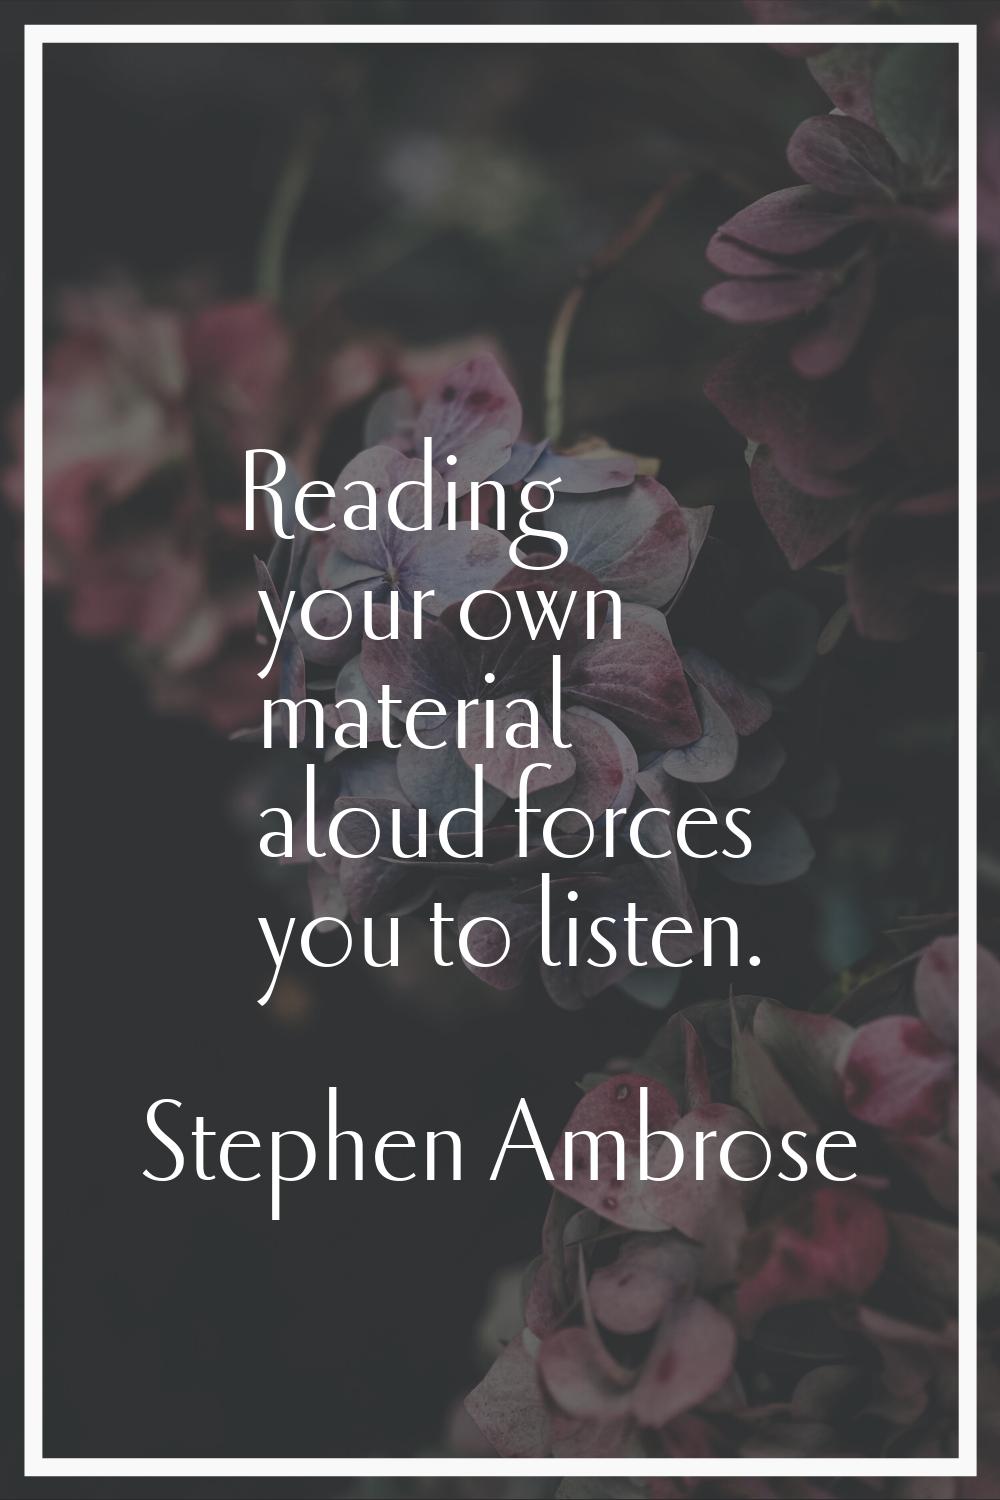 Reading your own material aloud forces you to listen.